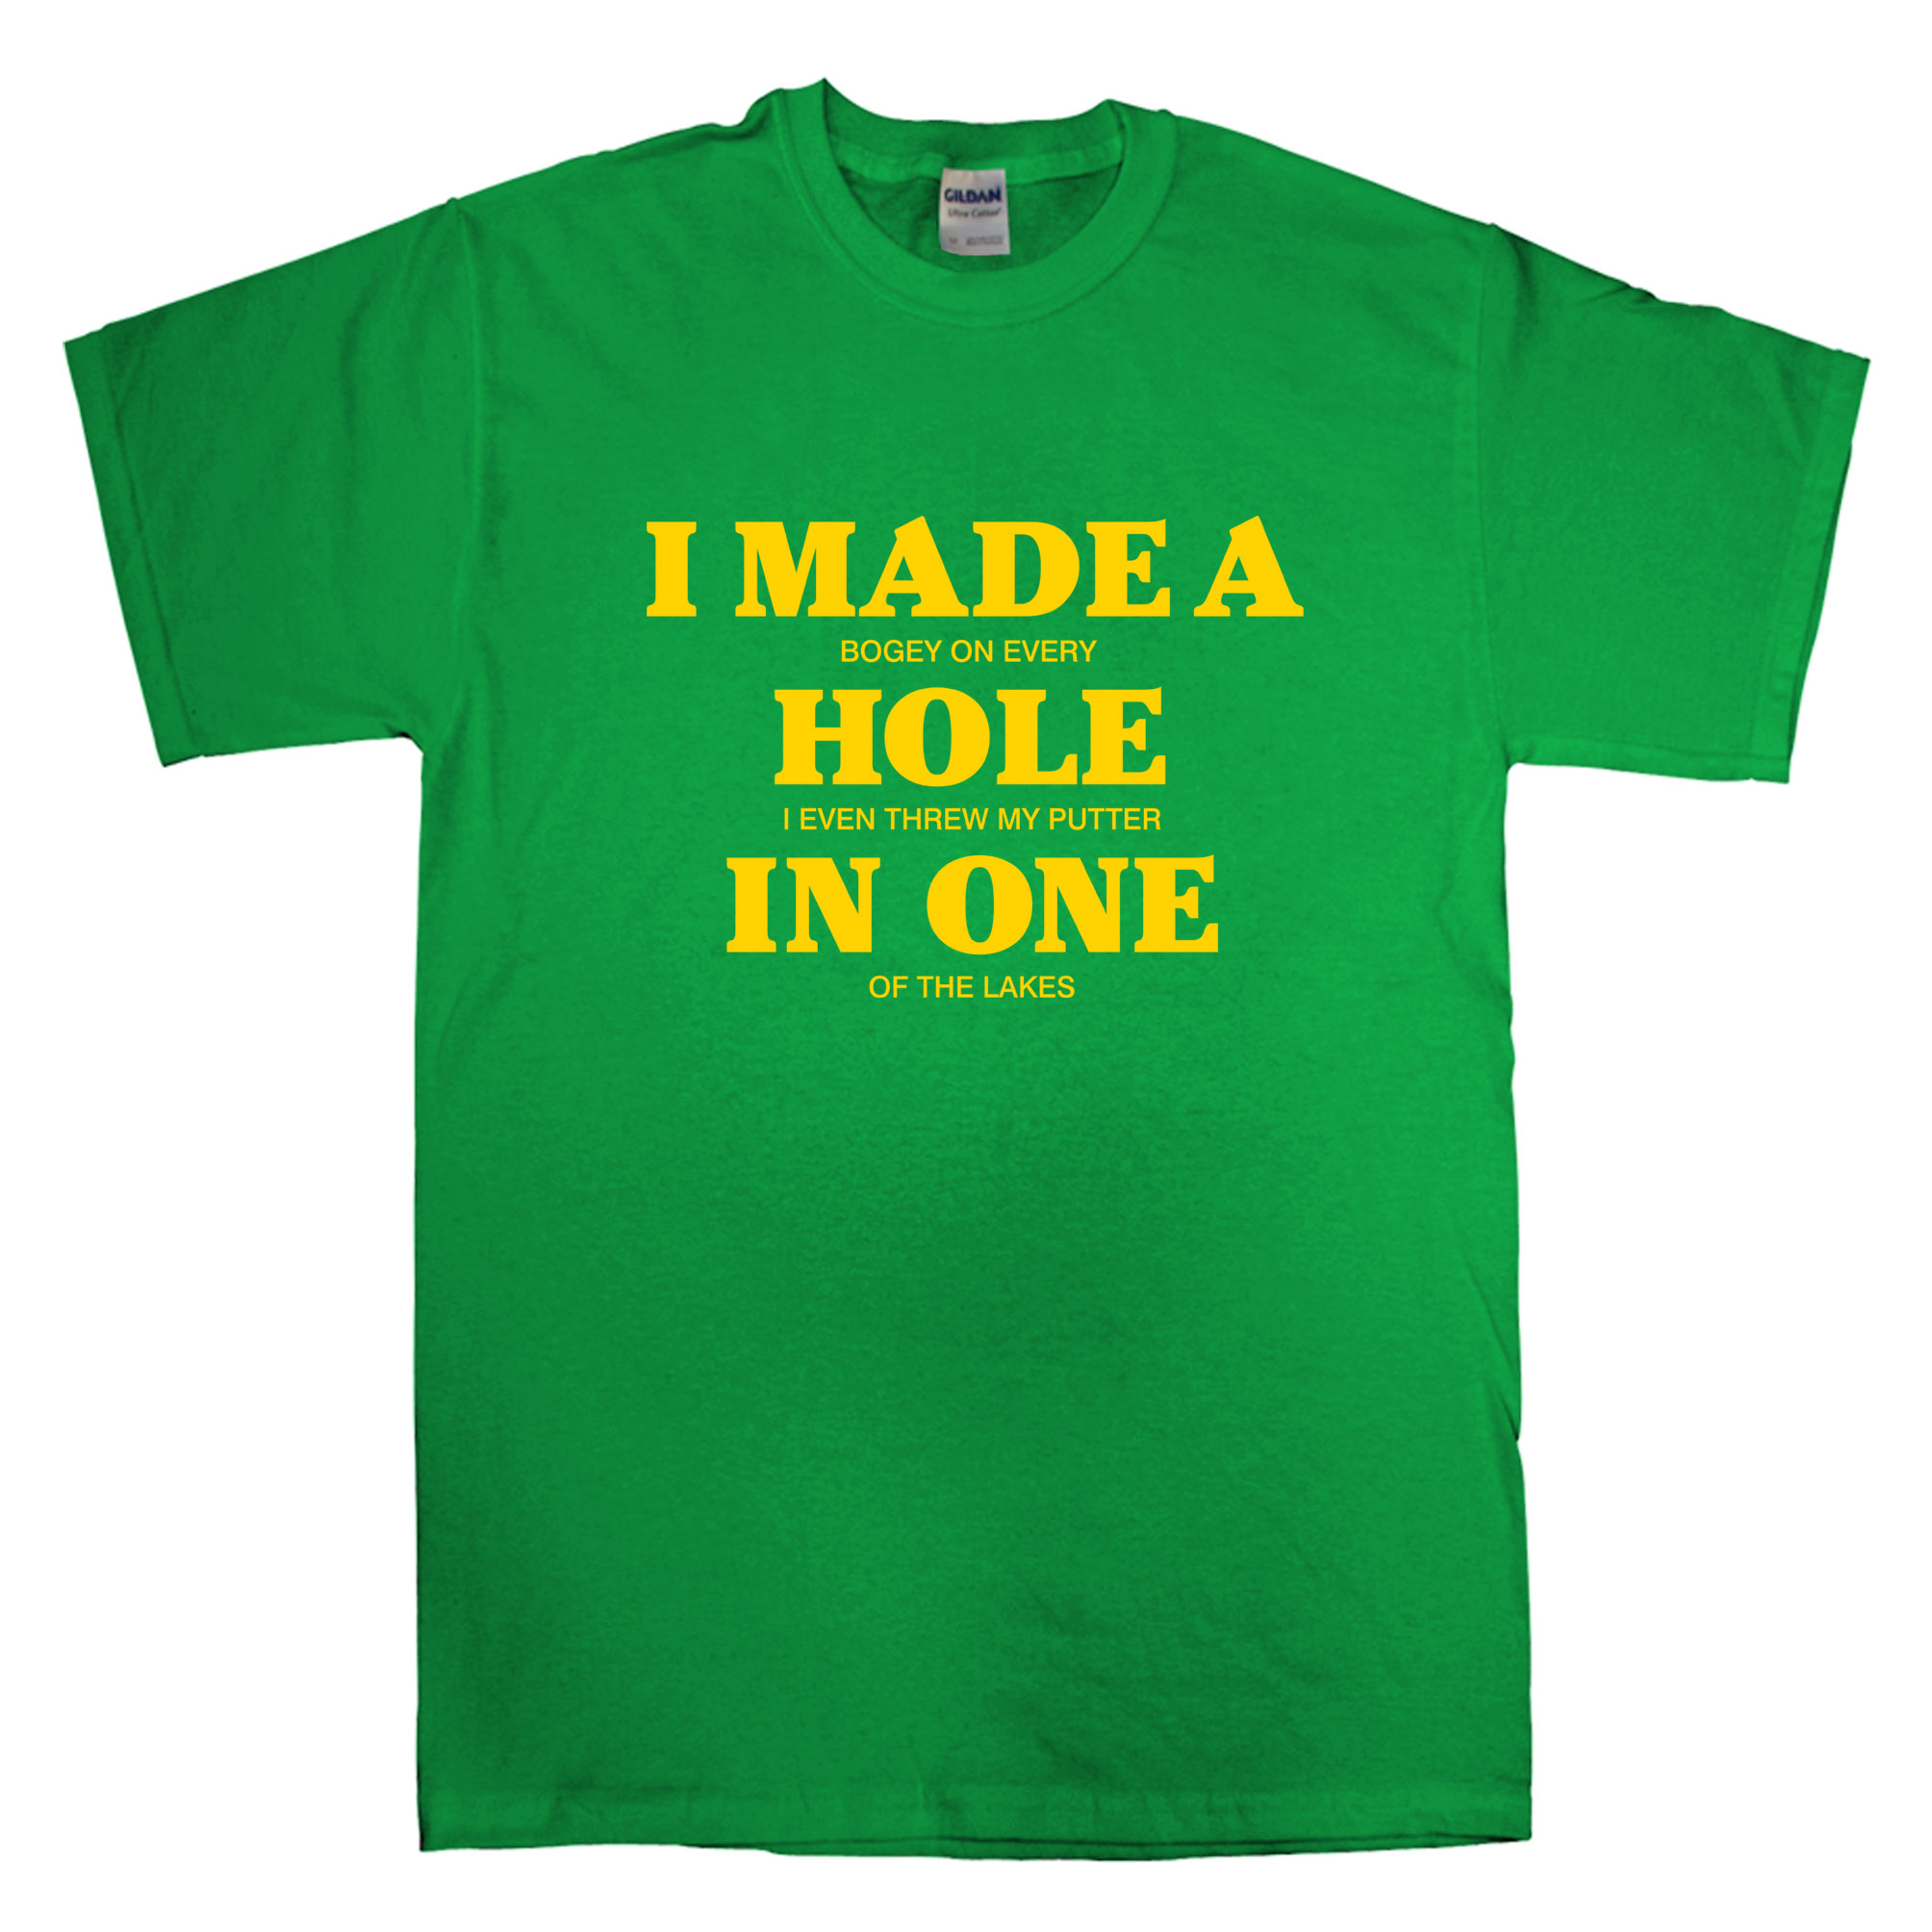 Mens Golf T Shirt - I Made A Hole In One | eBay